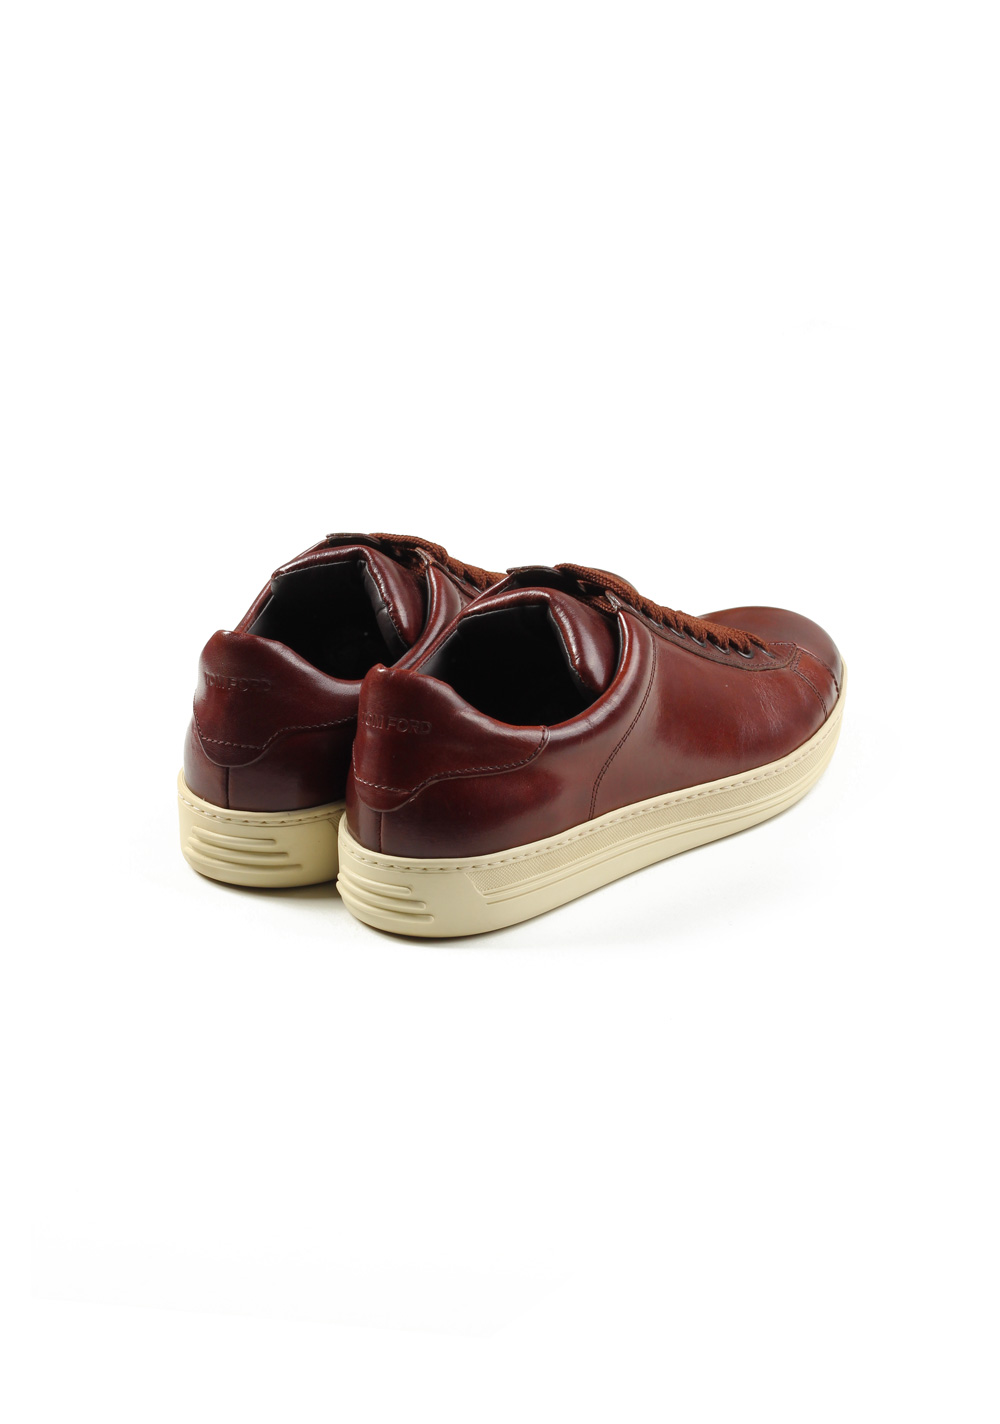 TOM FORD Russel Low Top Brown Leather Sneaker Shoes Size 10 UK / 11 U.S. | Costume Limité